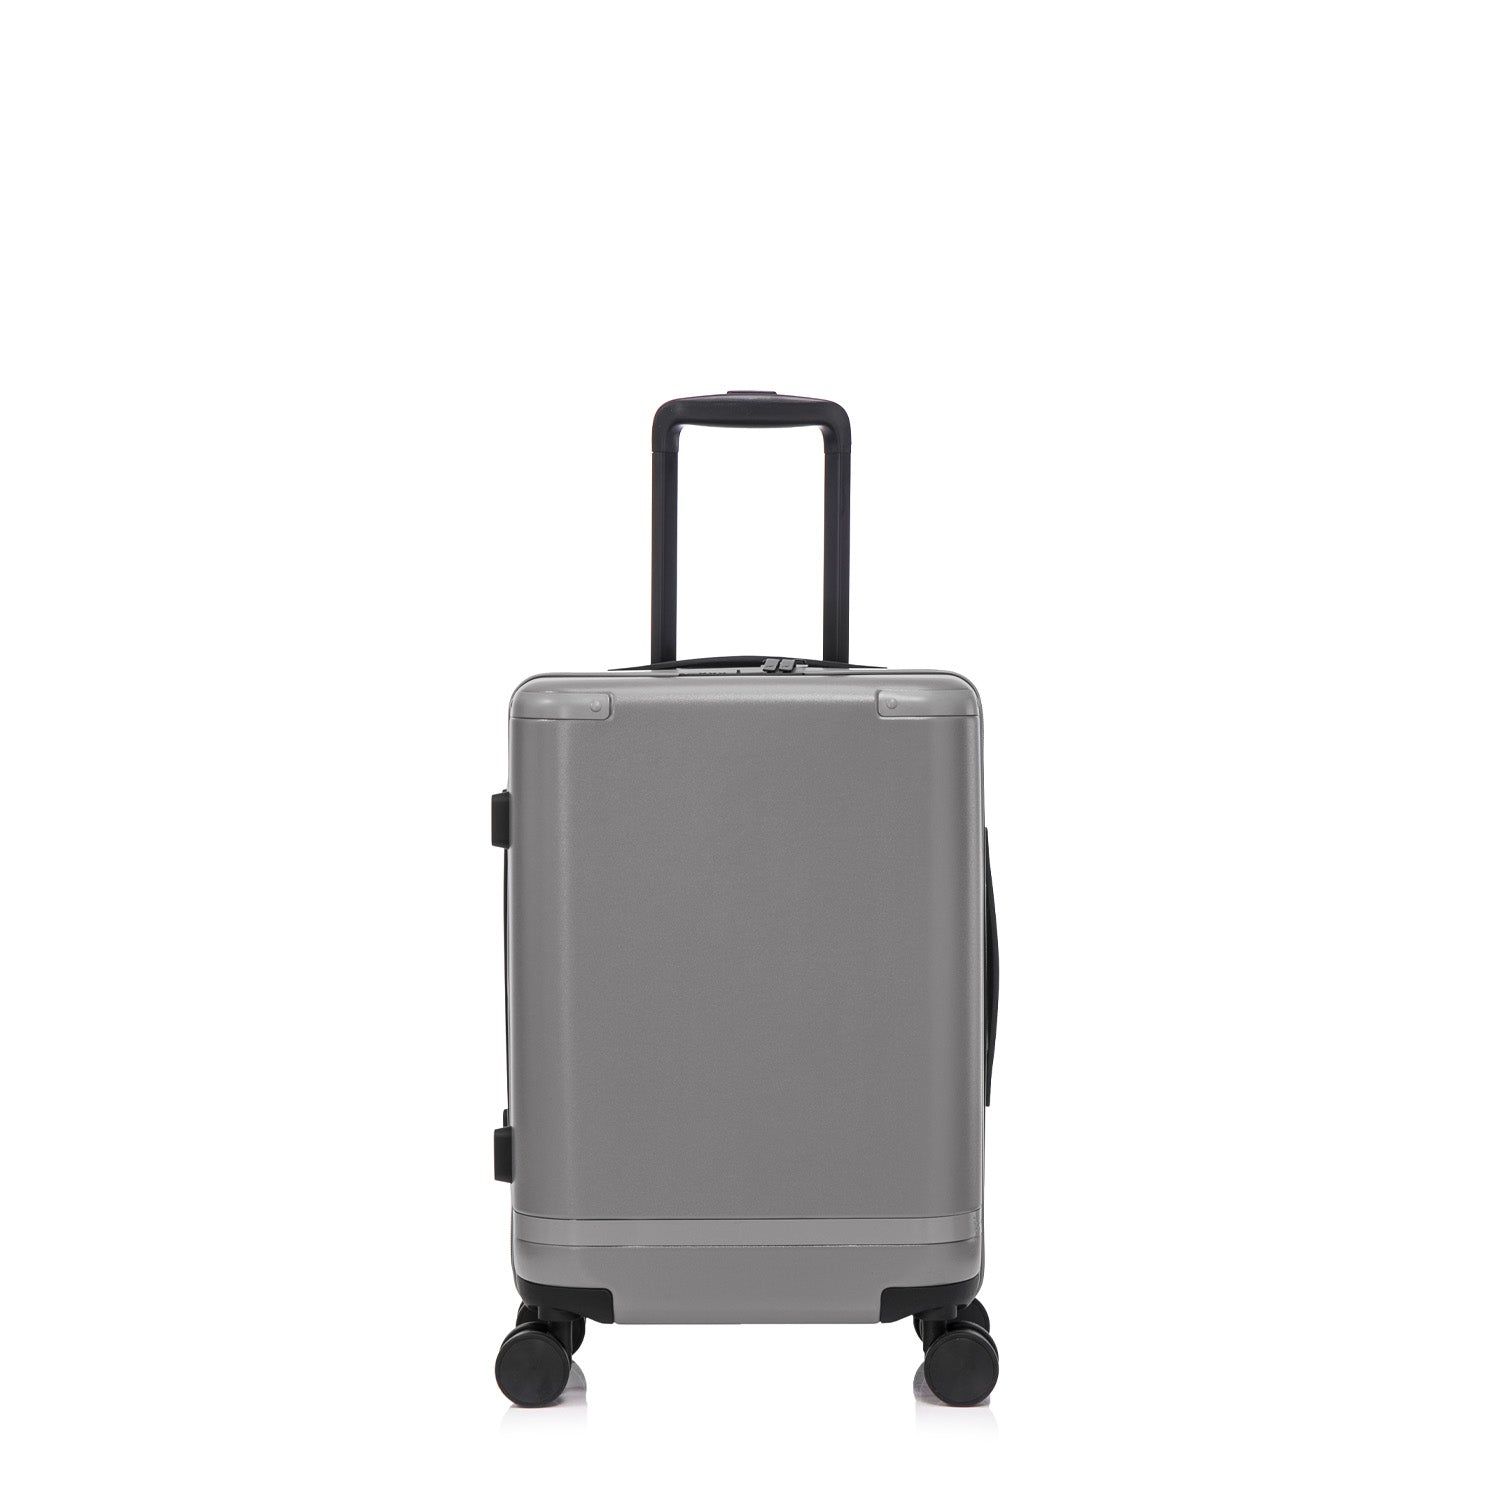 Qantas- QF250 ROME 56cm Small cabin spinner suitcase - Charcoal-4